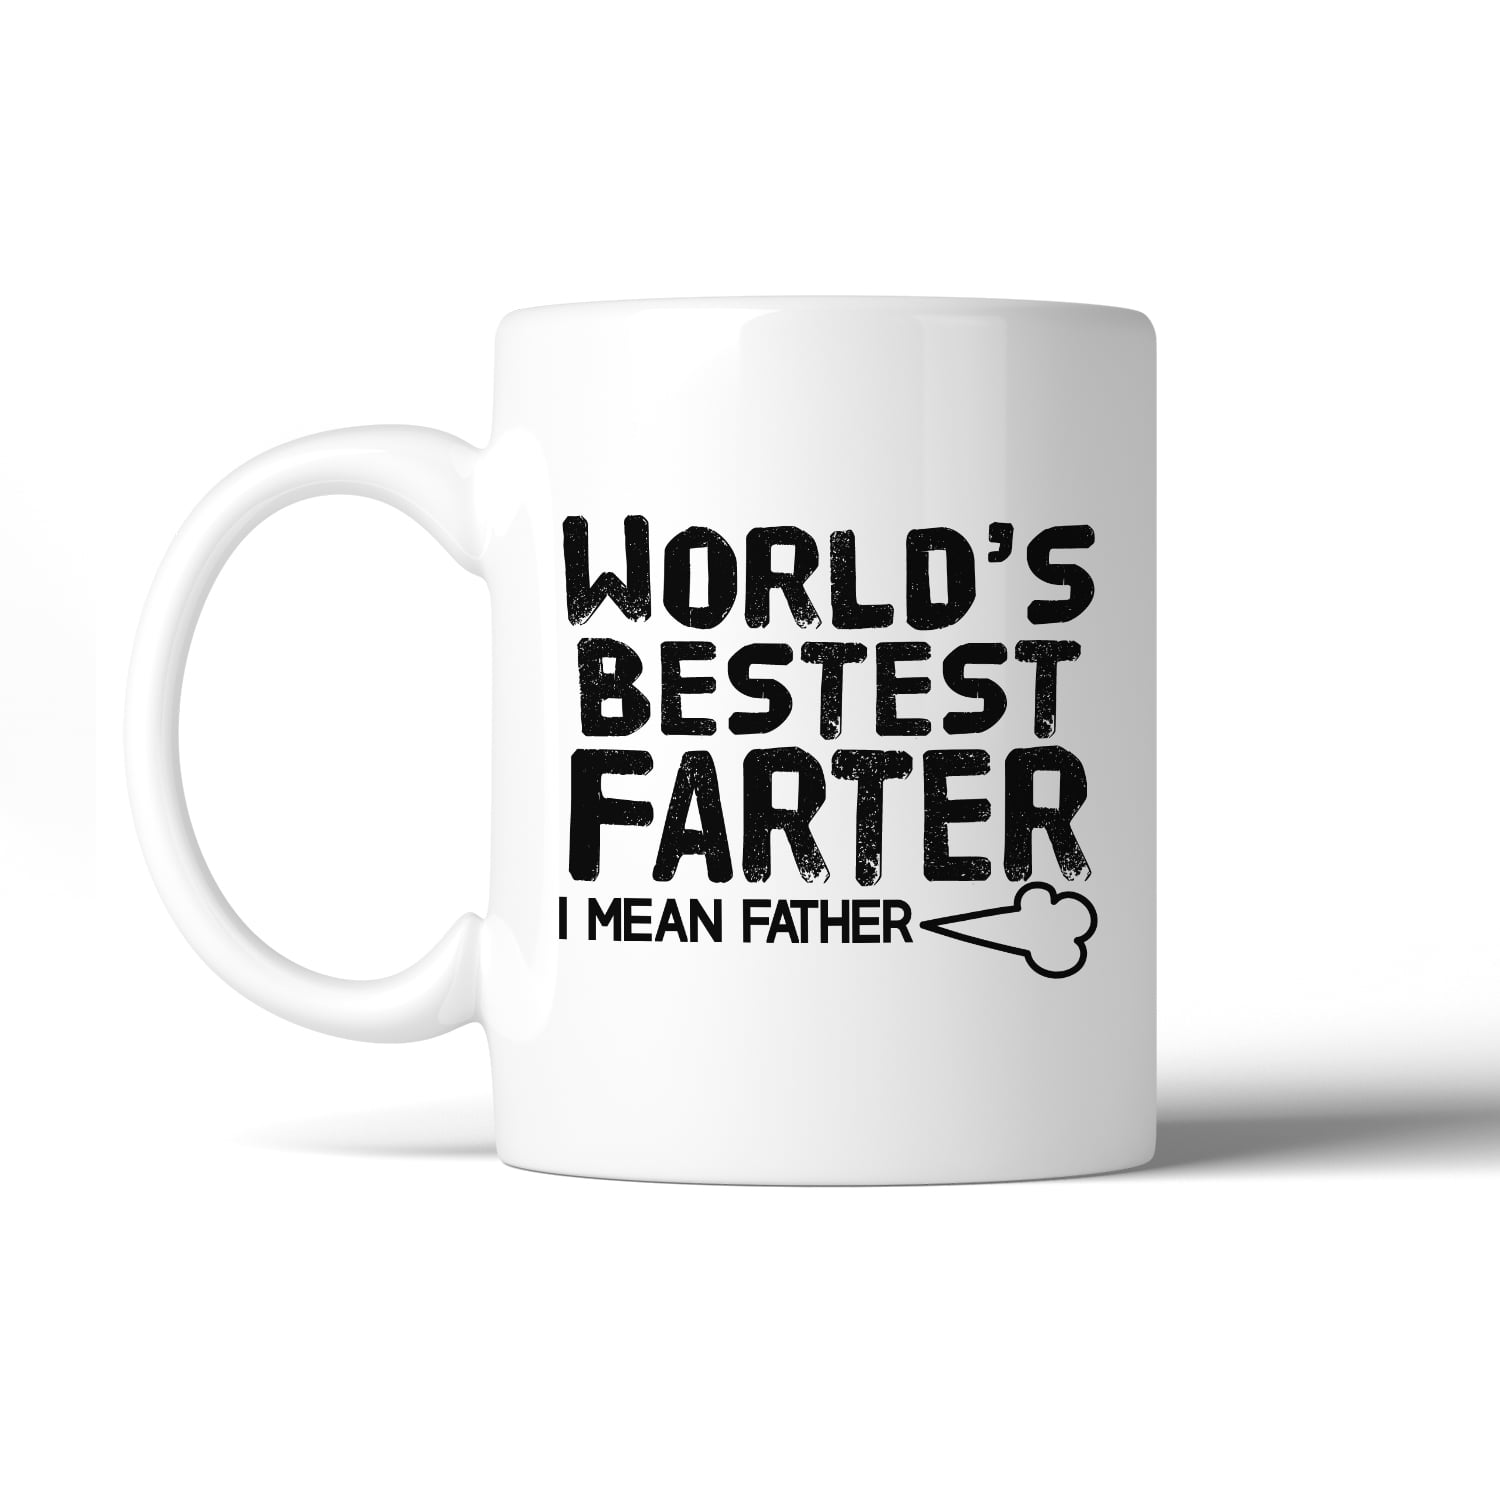 Funny Drinkware Best Friend Gift Funny Coffee Mug Campfire Mug Welcome To The Shit Show Farmhouse Kitchen Big Little Gift